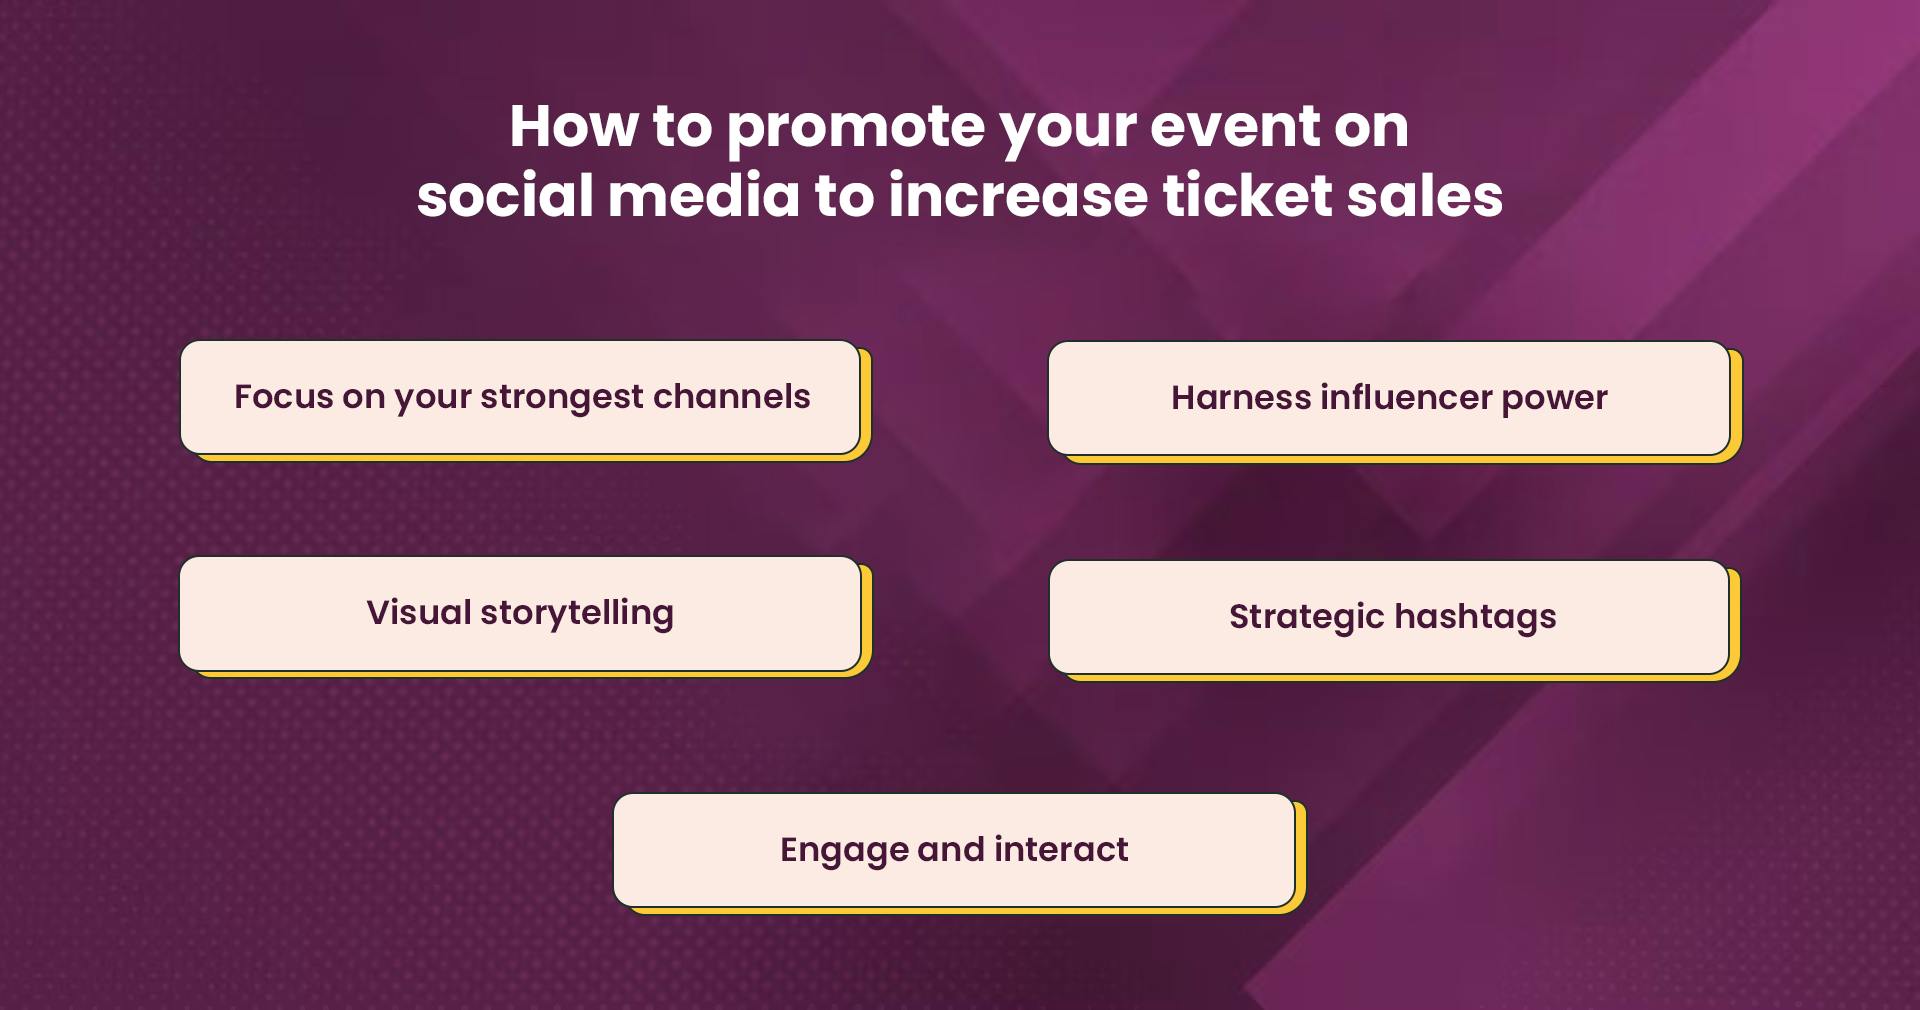 Tips to promote your event on social media